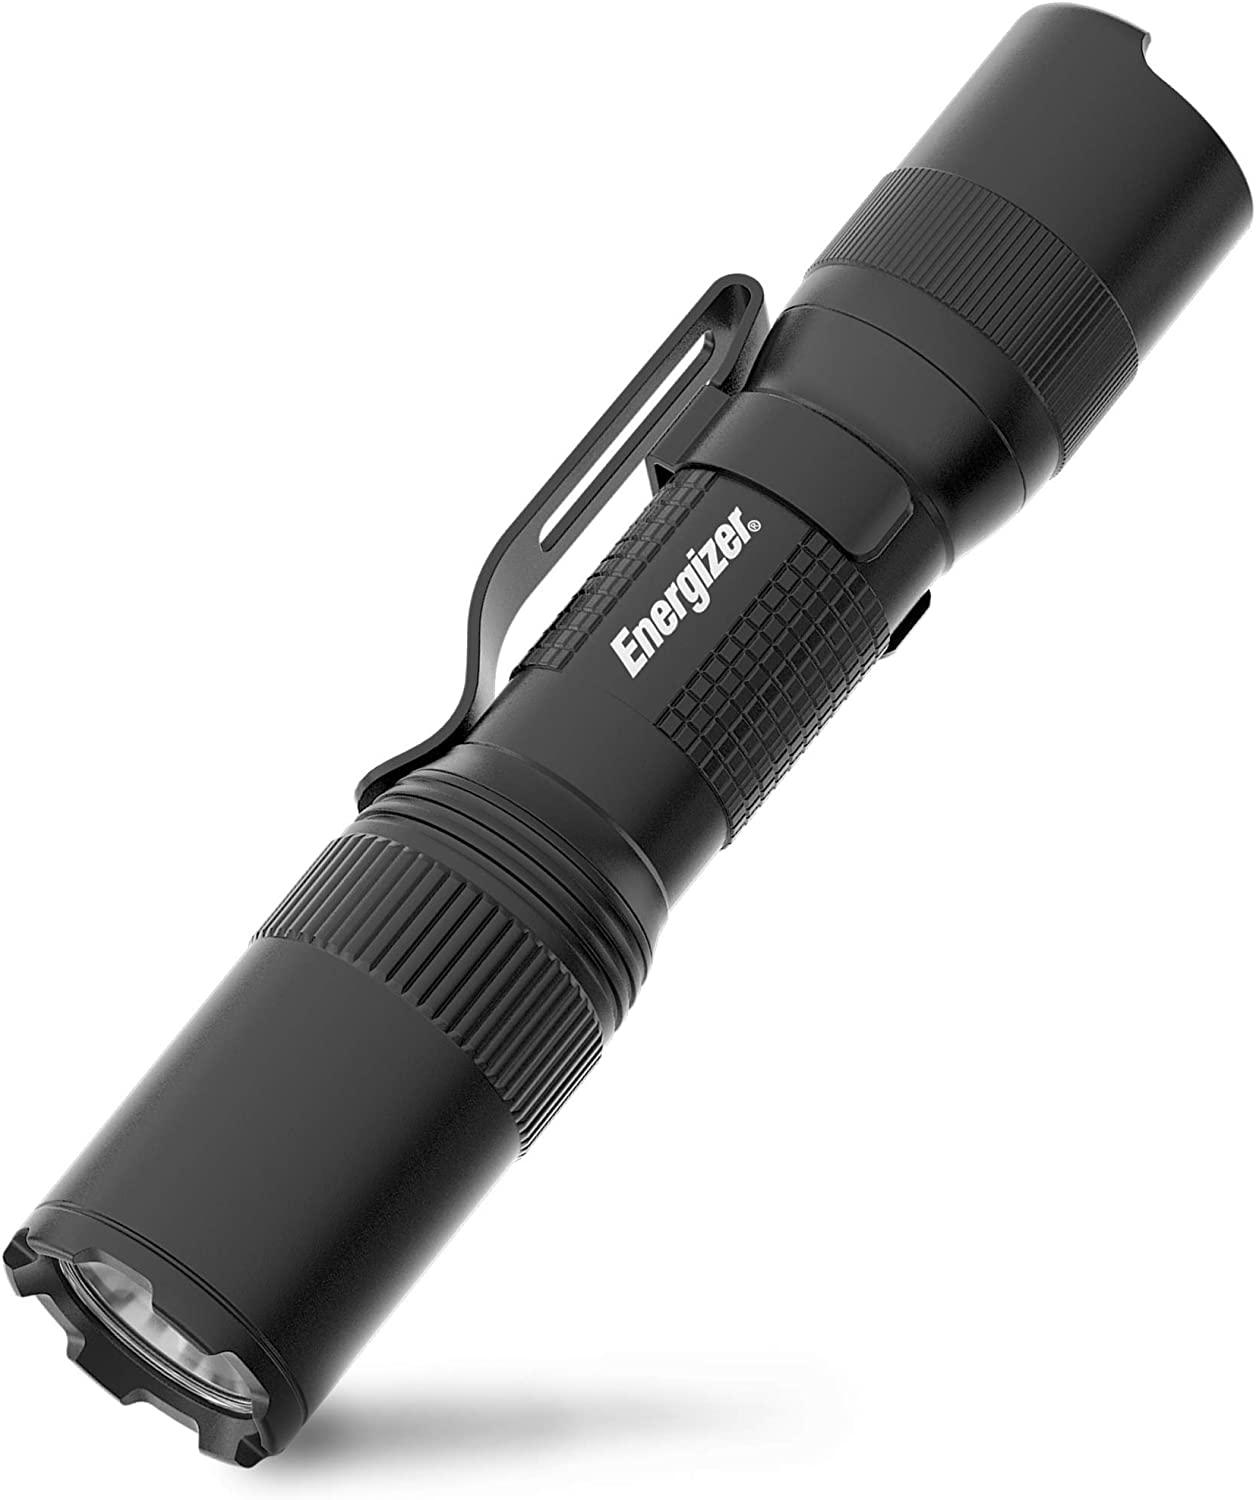 Energizer LED Tactical Flashlights, Rugged Metal Body, IPX4 Water Resistant Flash Lights, High Lumens, Built for Camping, Outdoors, Emergency, Batteries Included